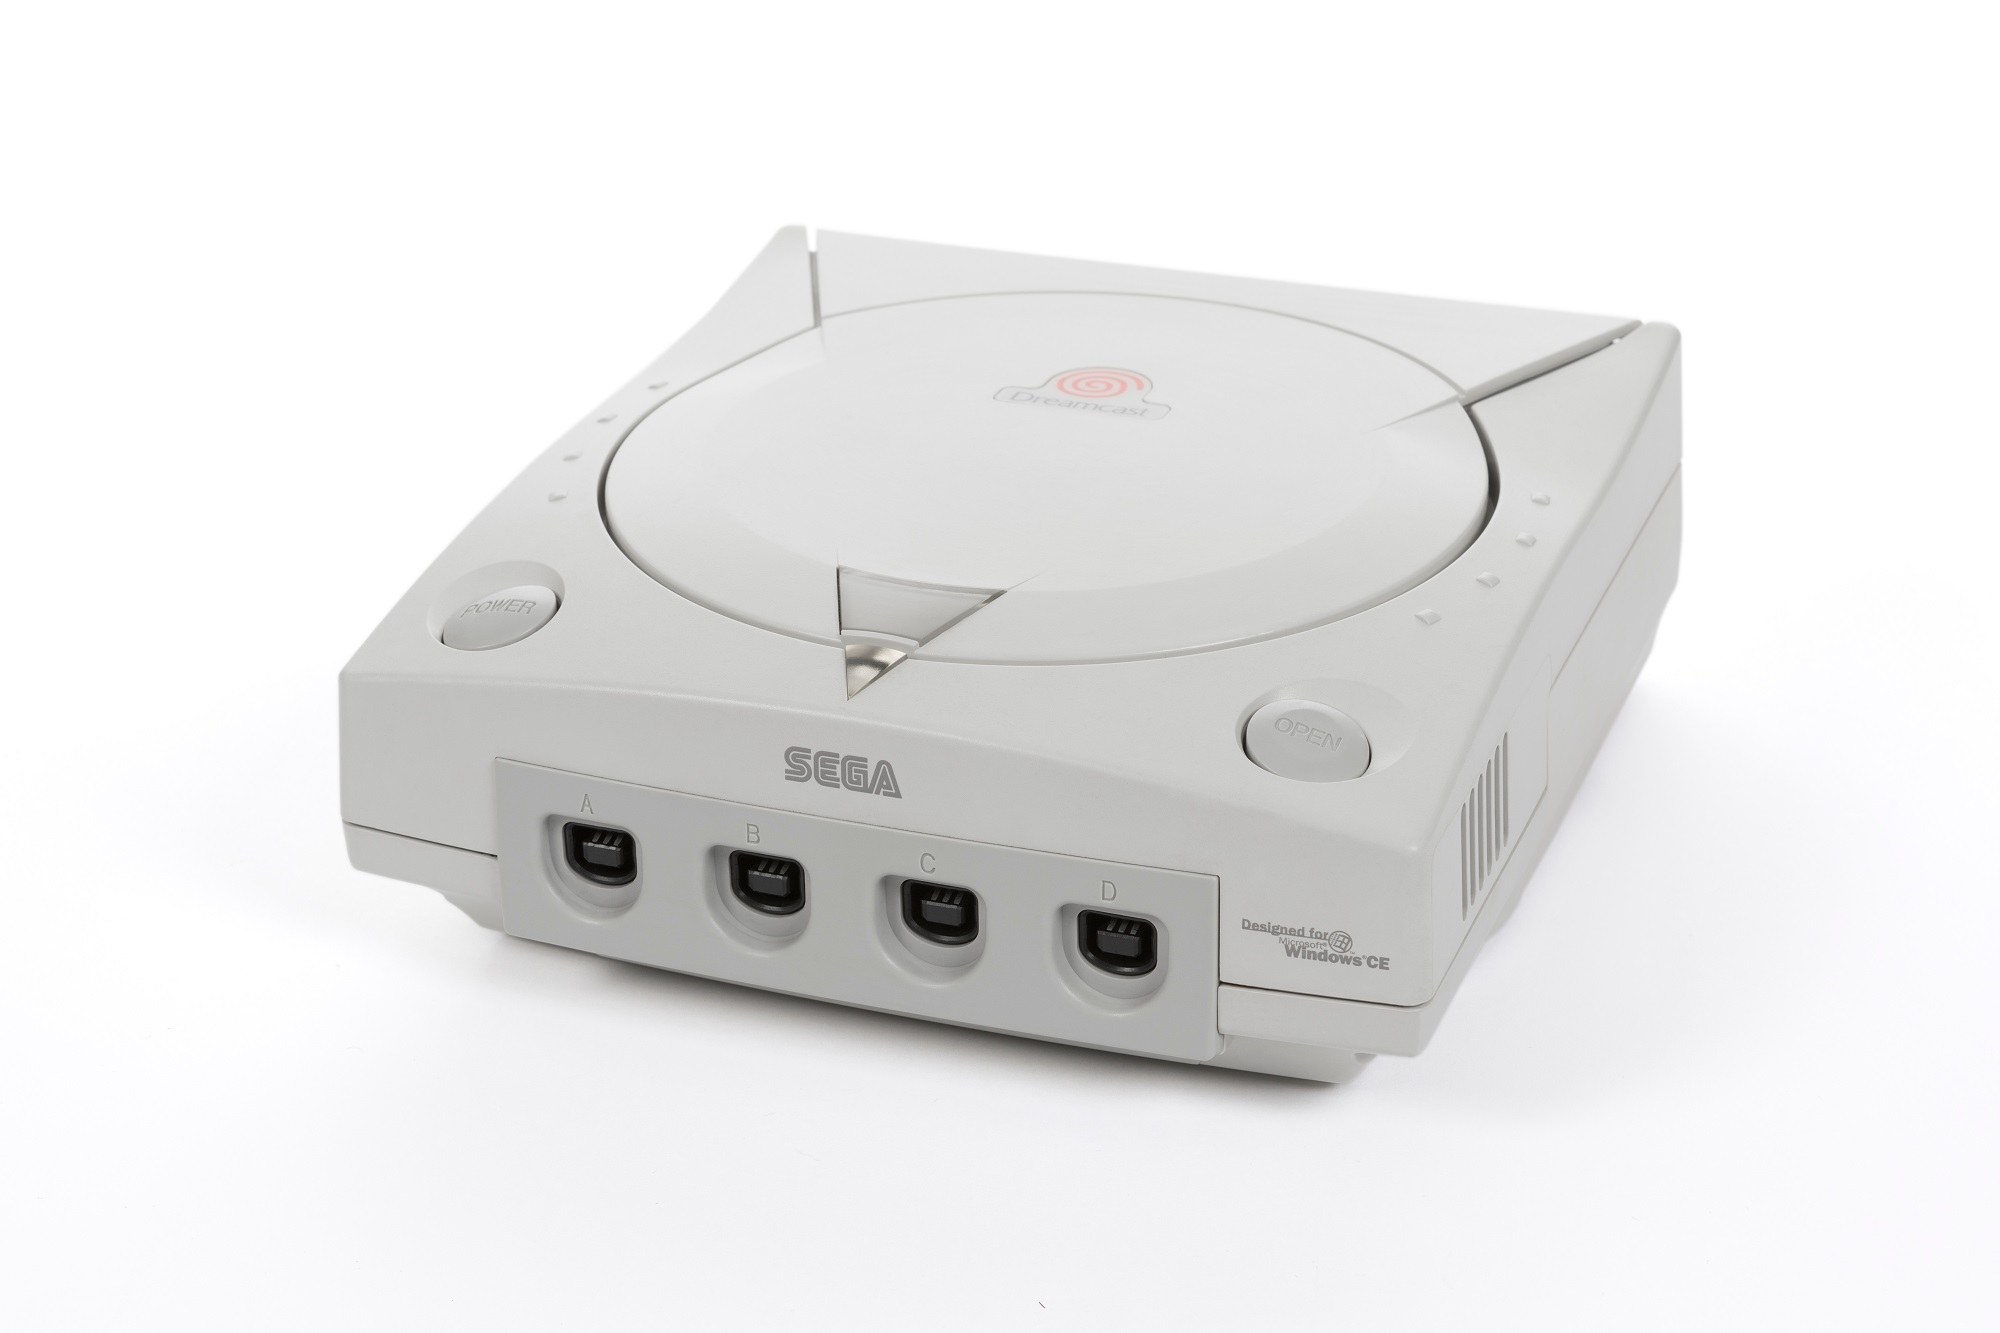 Sega reportedly asked Bill Gates to let Dreamcast games be playable on the Xbox